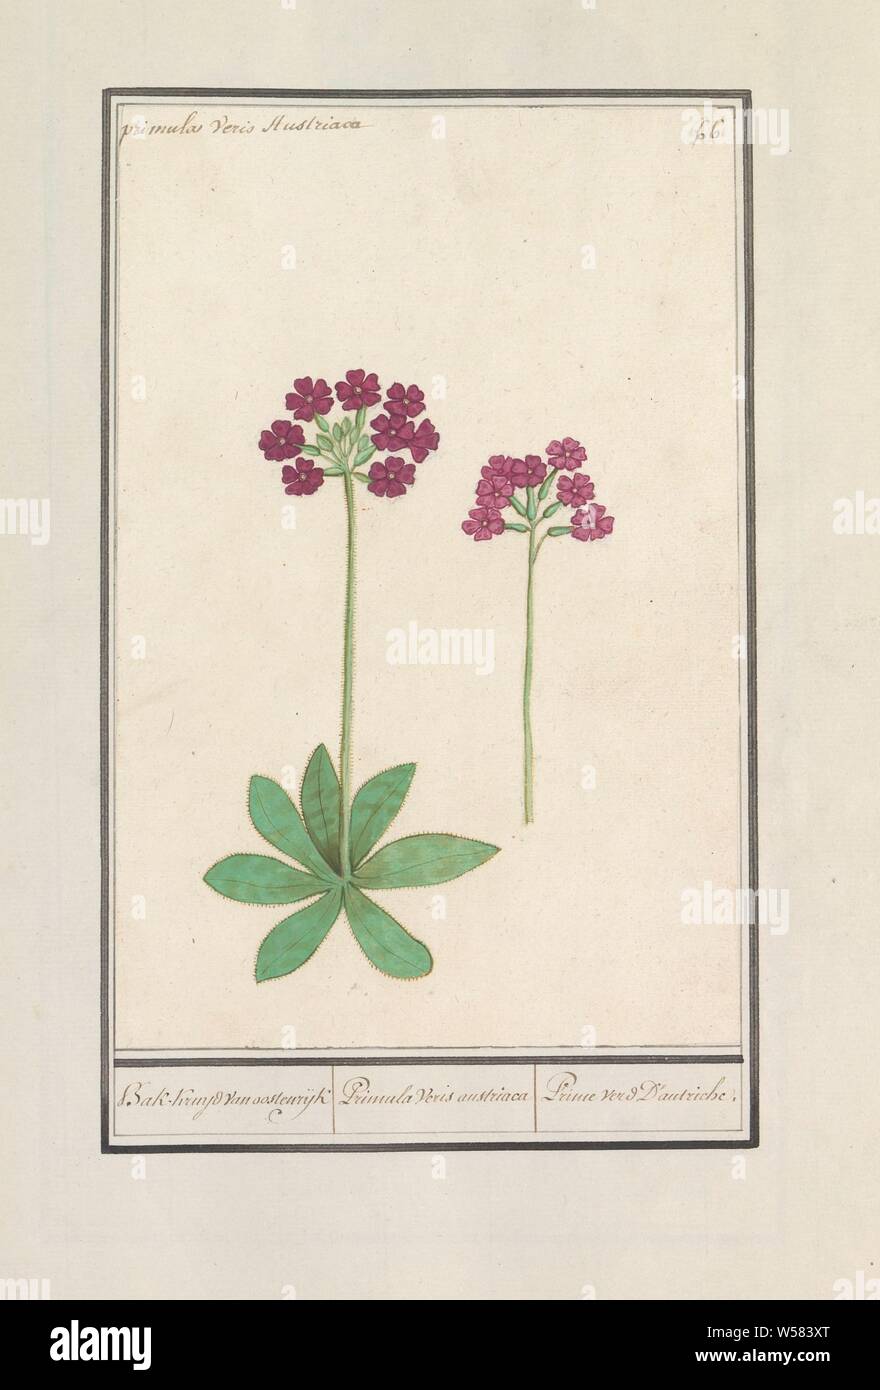 Primrose (Primula), Bak-Kruyd from Austria / Primula Veris austriaca / Prime verd D ' autriche. (title on object), Primrose (Primula) with dark pink flowers. Numbered top right: 66. Top left the Latin name. Part of the first album with drawings of flowers and plants. Eighth of twelve albums with drawings of animals, birds and plants known around 1600, commissioned by Emperor Rudolf II. With explanations in Dutch, Latin and French, Anselmus Boetius de Boodt, 1596 - 1610, paper, watercolor (paint), deck paint, chalk, ink, pen, h 241 mm × w 161 mm Stock Photo